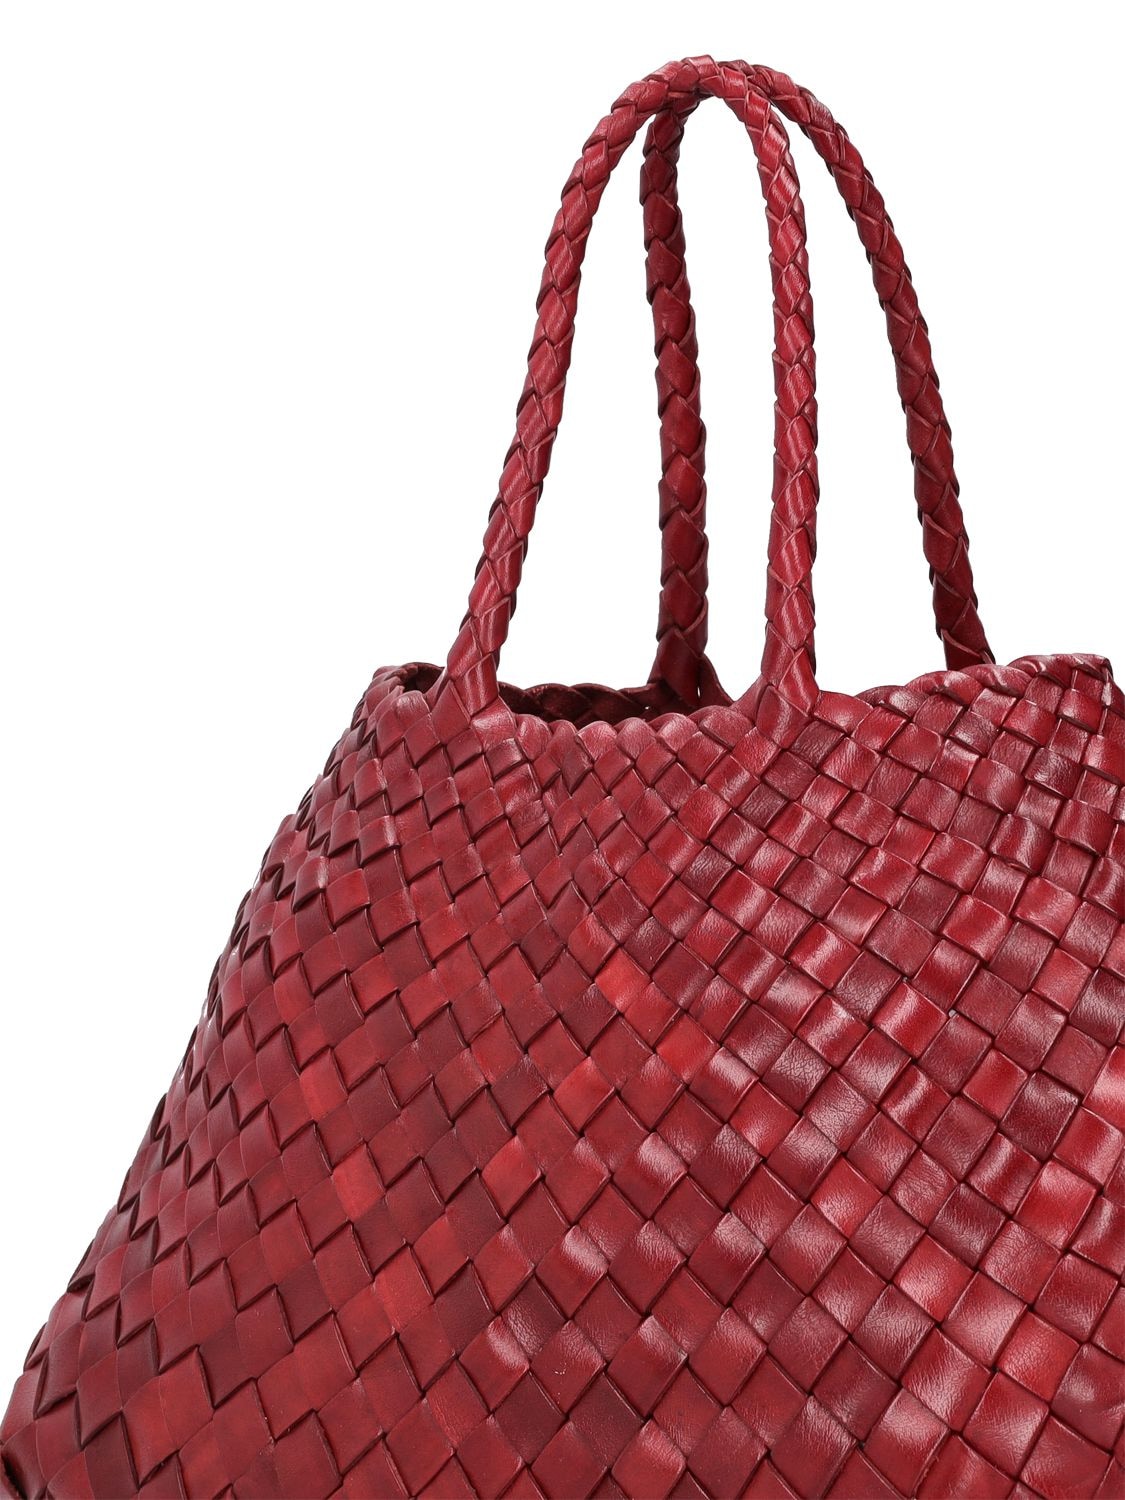 DRAGON DIFFUSION Window woven leather tote bag Red